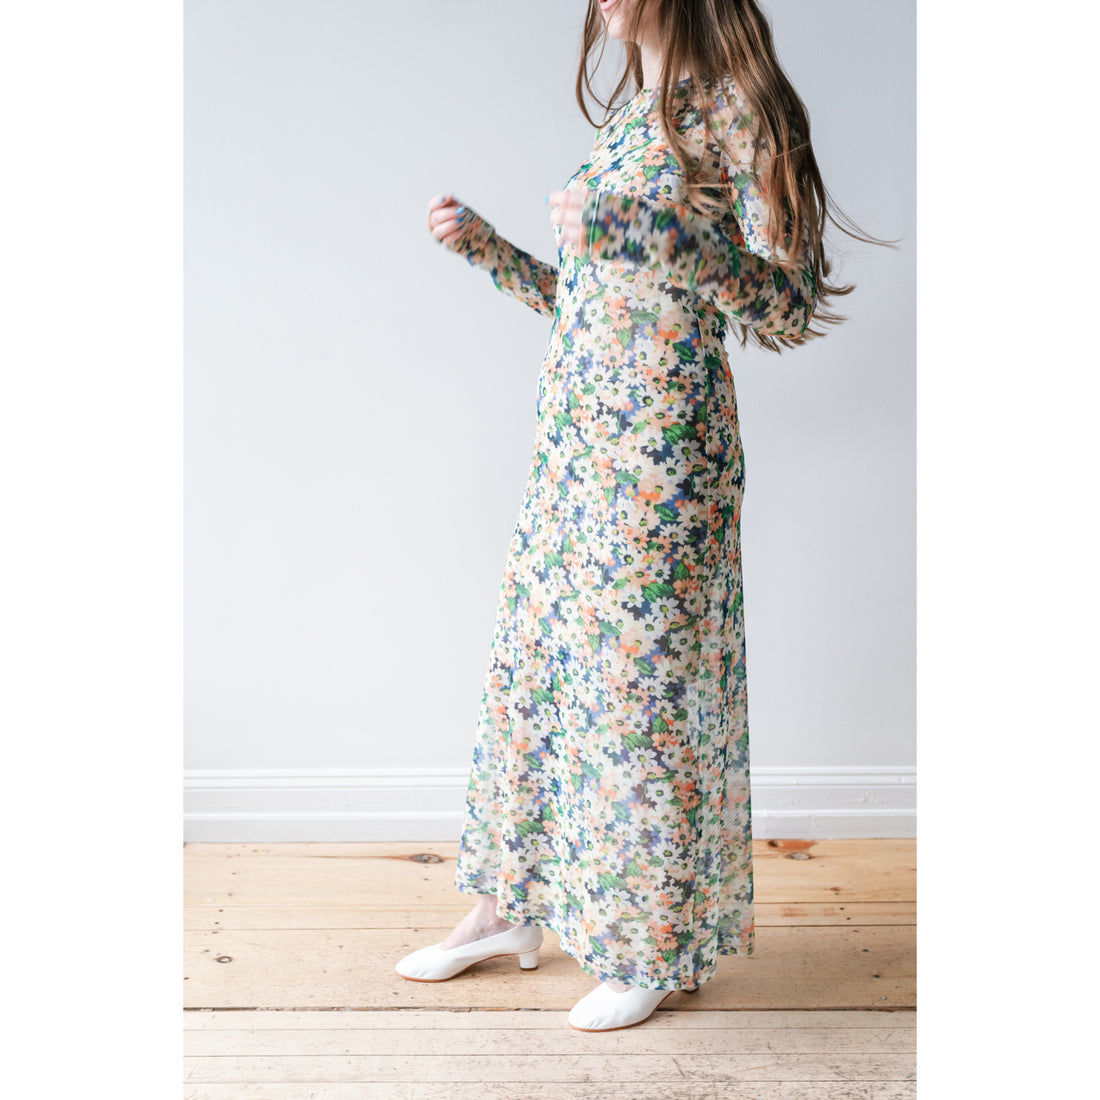 Nomia Long Sleeve Maxi Dress in Orange/Blue Floral Mesh